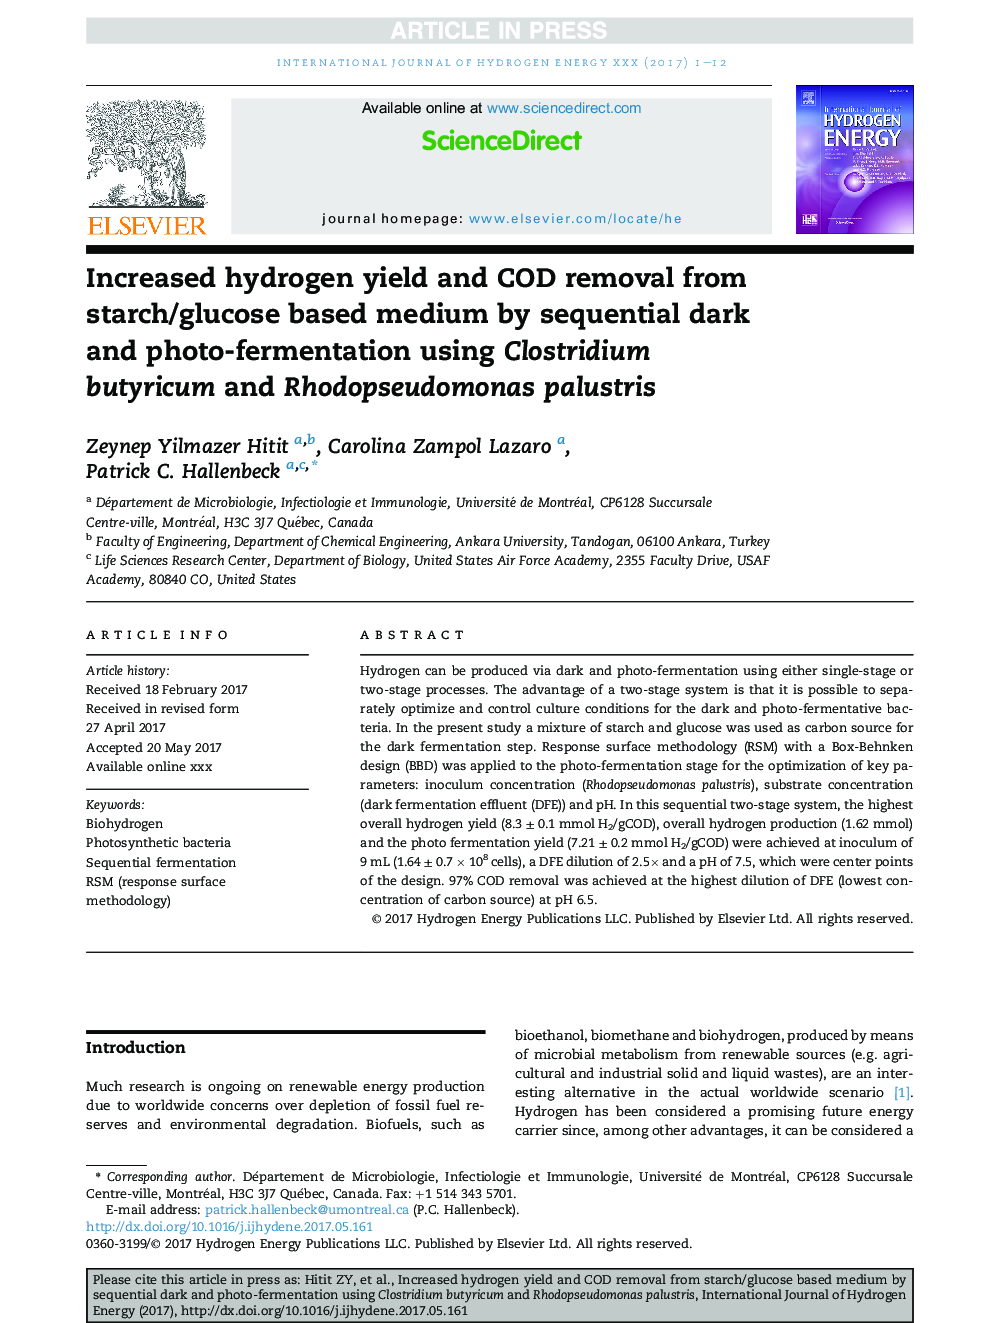 Increased hydrogen yield and COD removal from starch/glucose based medium by sequential dark and photo-fermentation using Clostridium butyricum and Rhodopseudomonas palustris